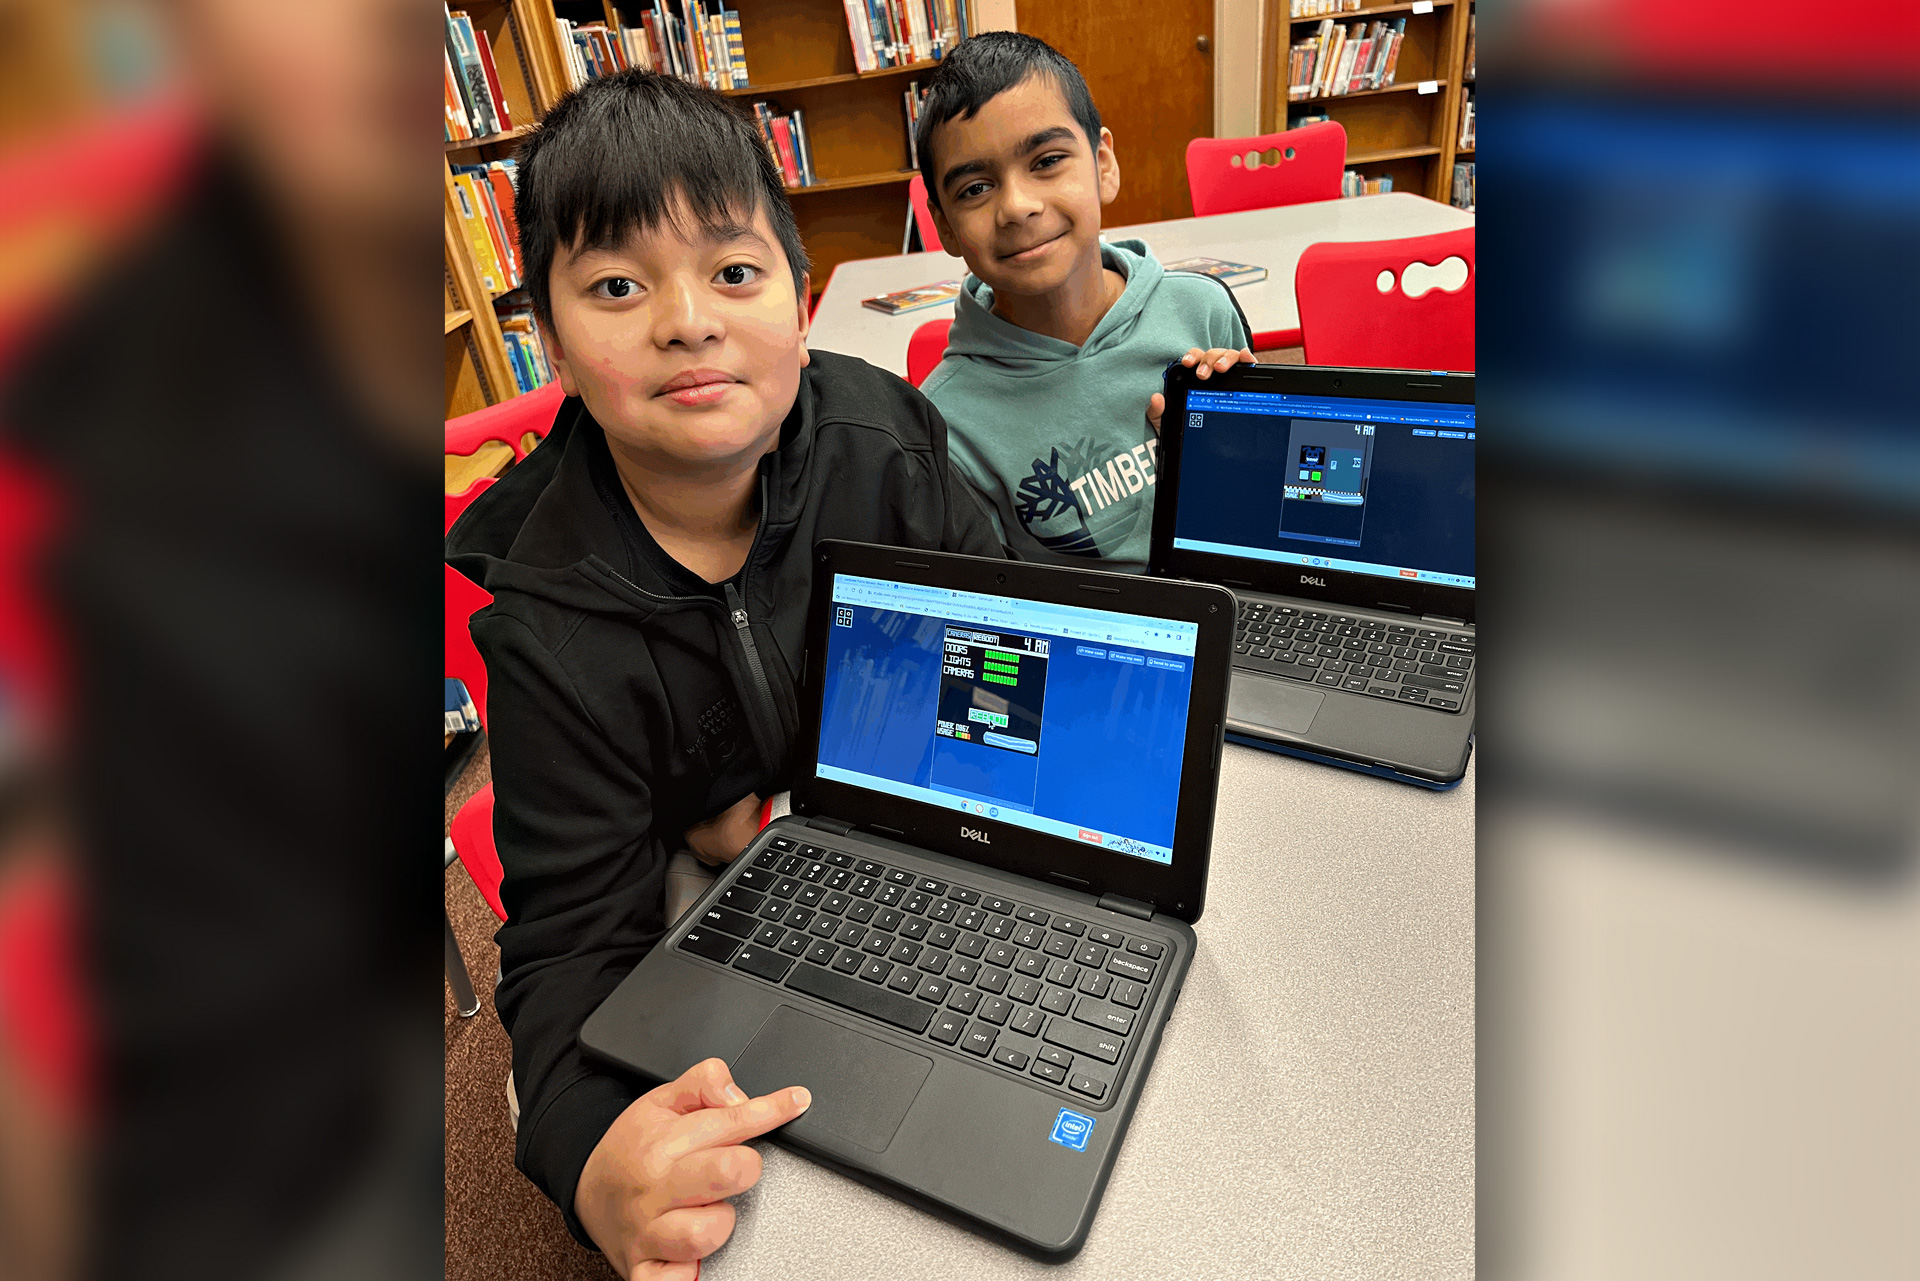 The fourth and fifth-grade students at Gardiners Avenue Elementary School were given the opportunity to learn the coding behind computer programming.